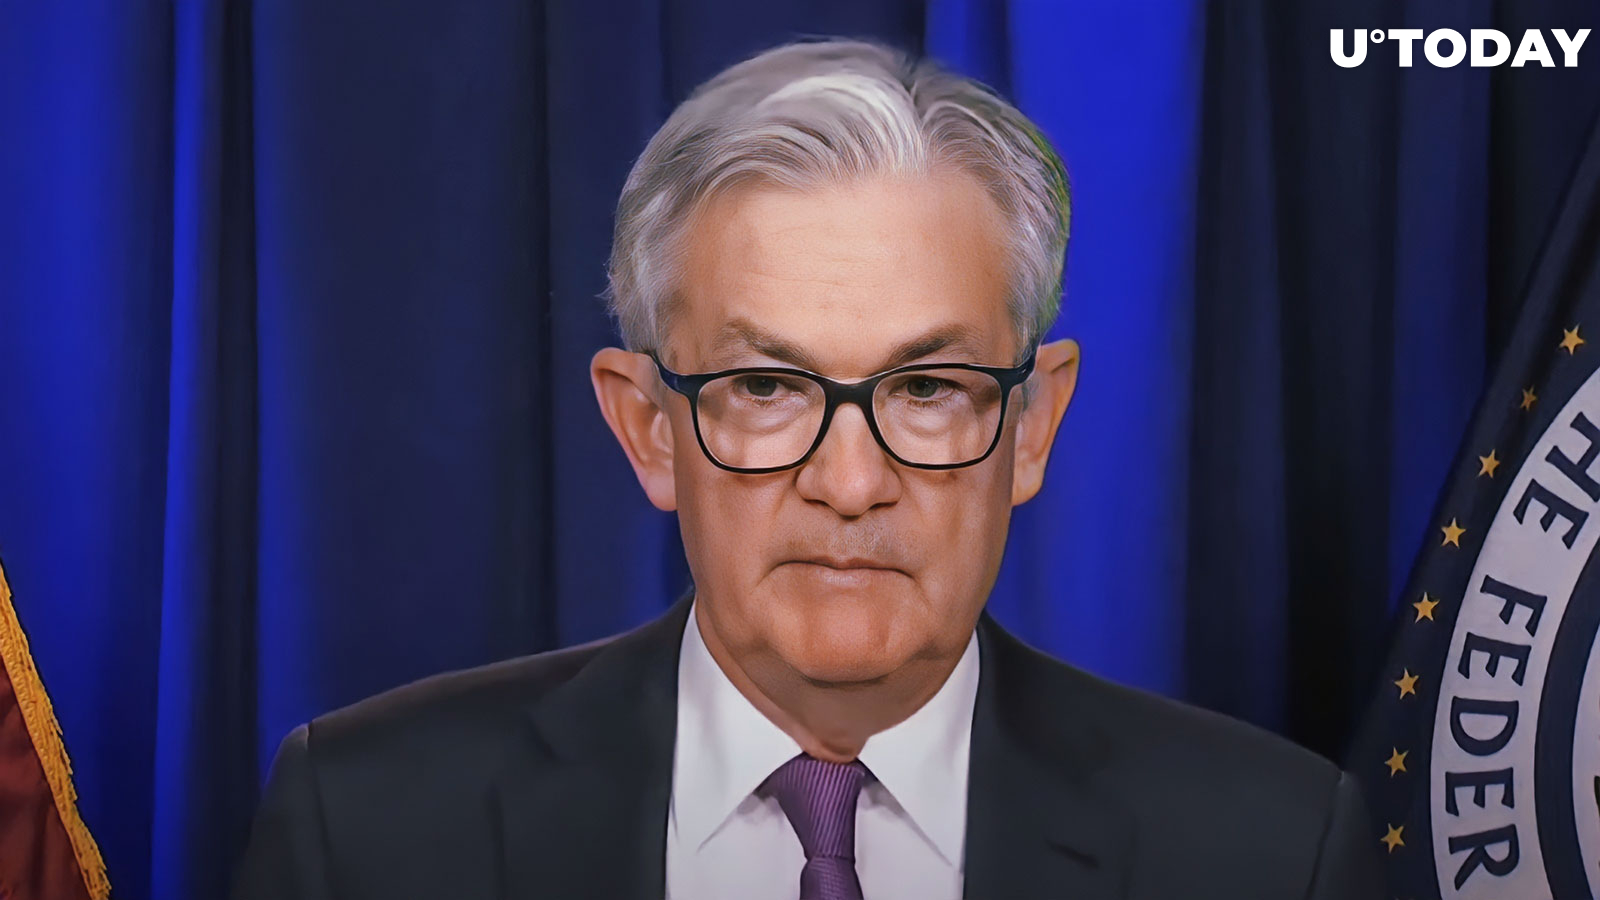 Crypto Market Grows on Jerome Powell's Speech, Here's Who's Rising Most in Price